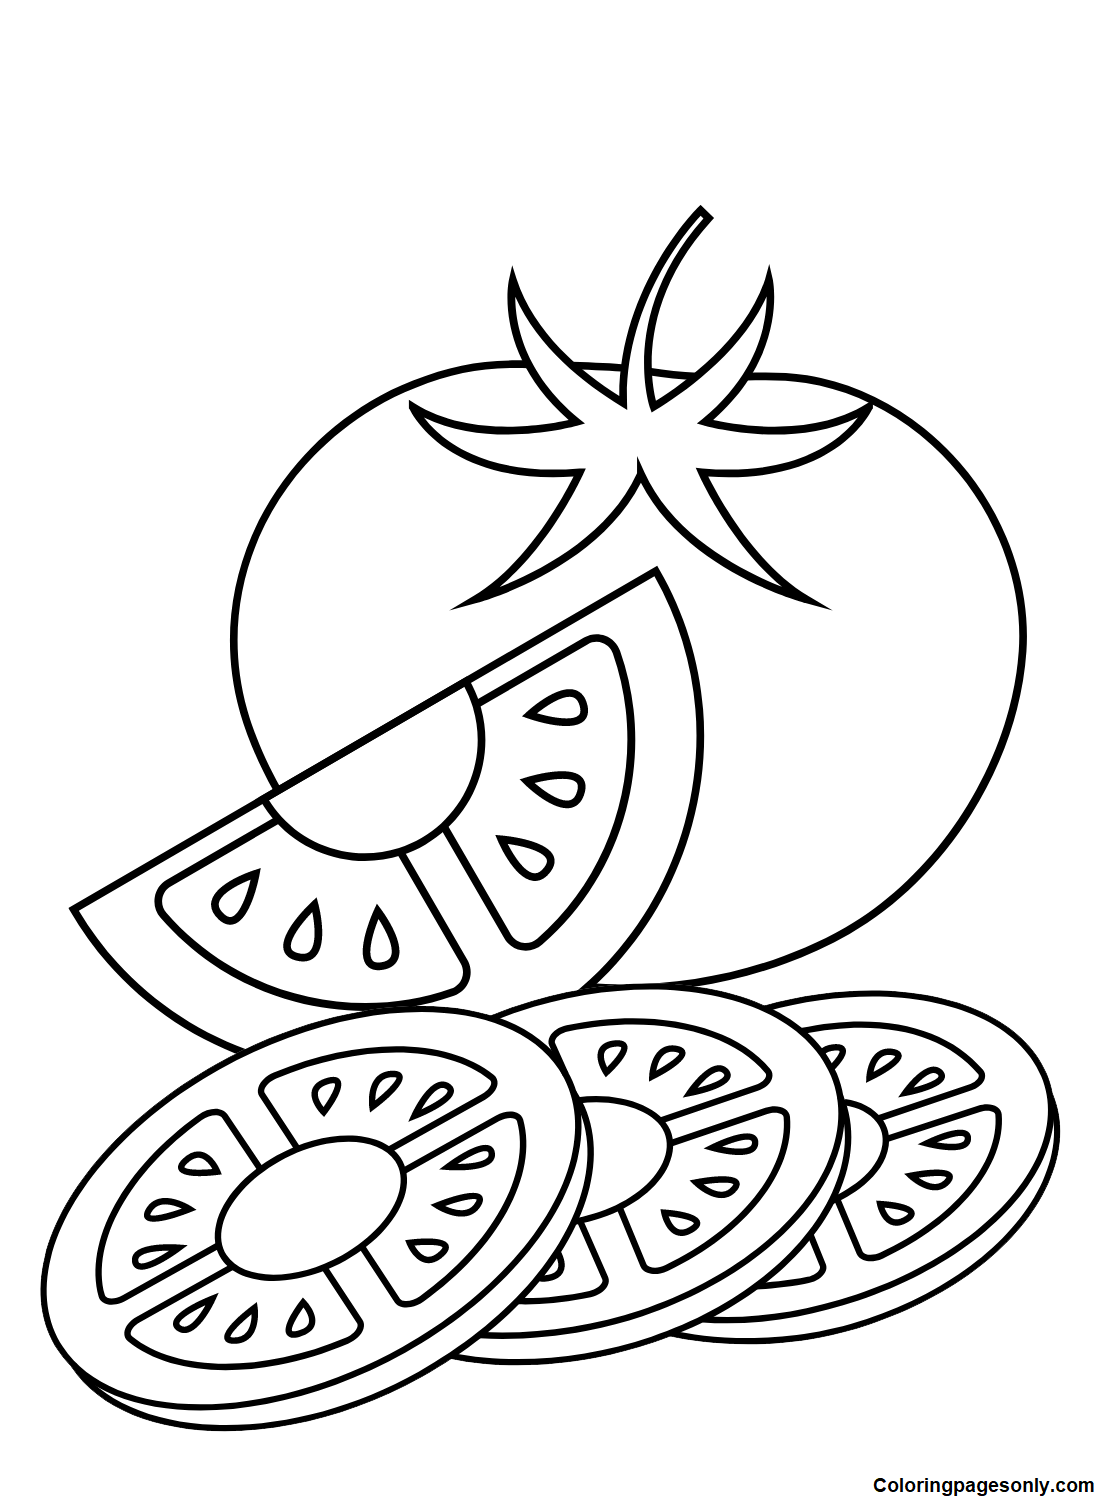 Club Sanwich with Tomato Coloring Pages